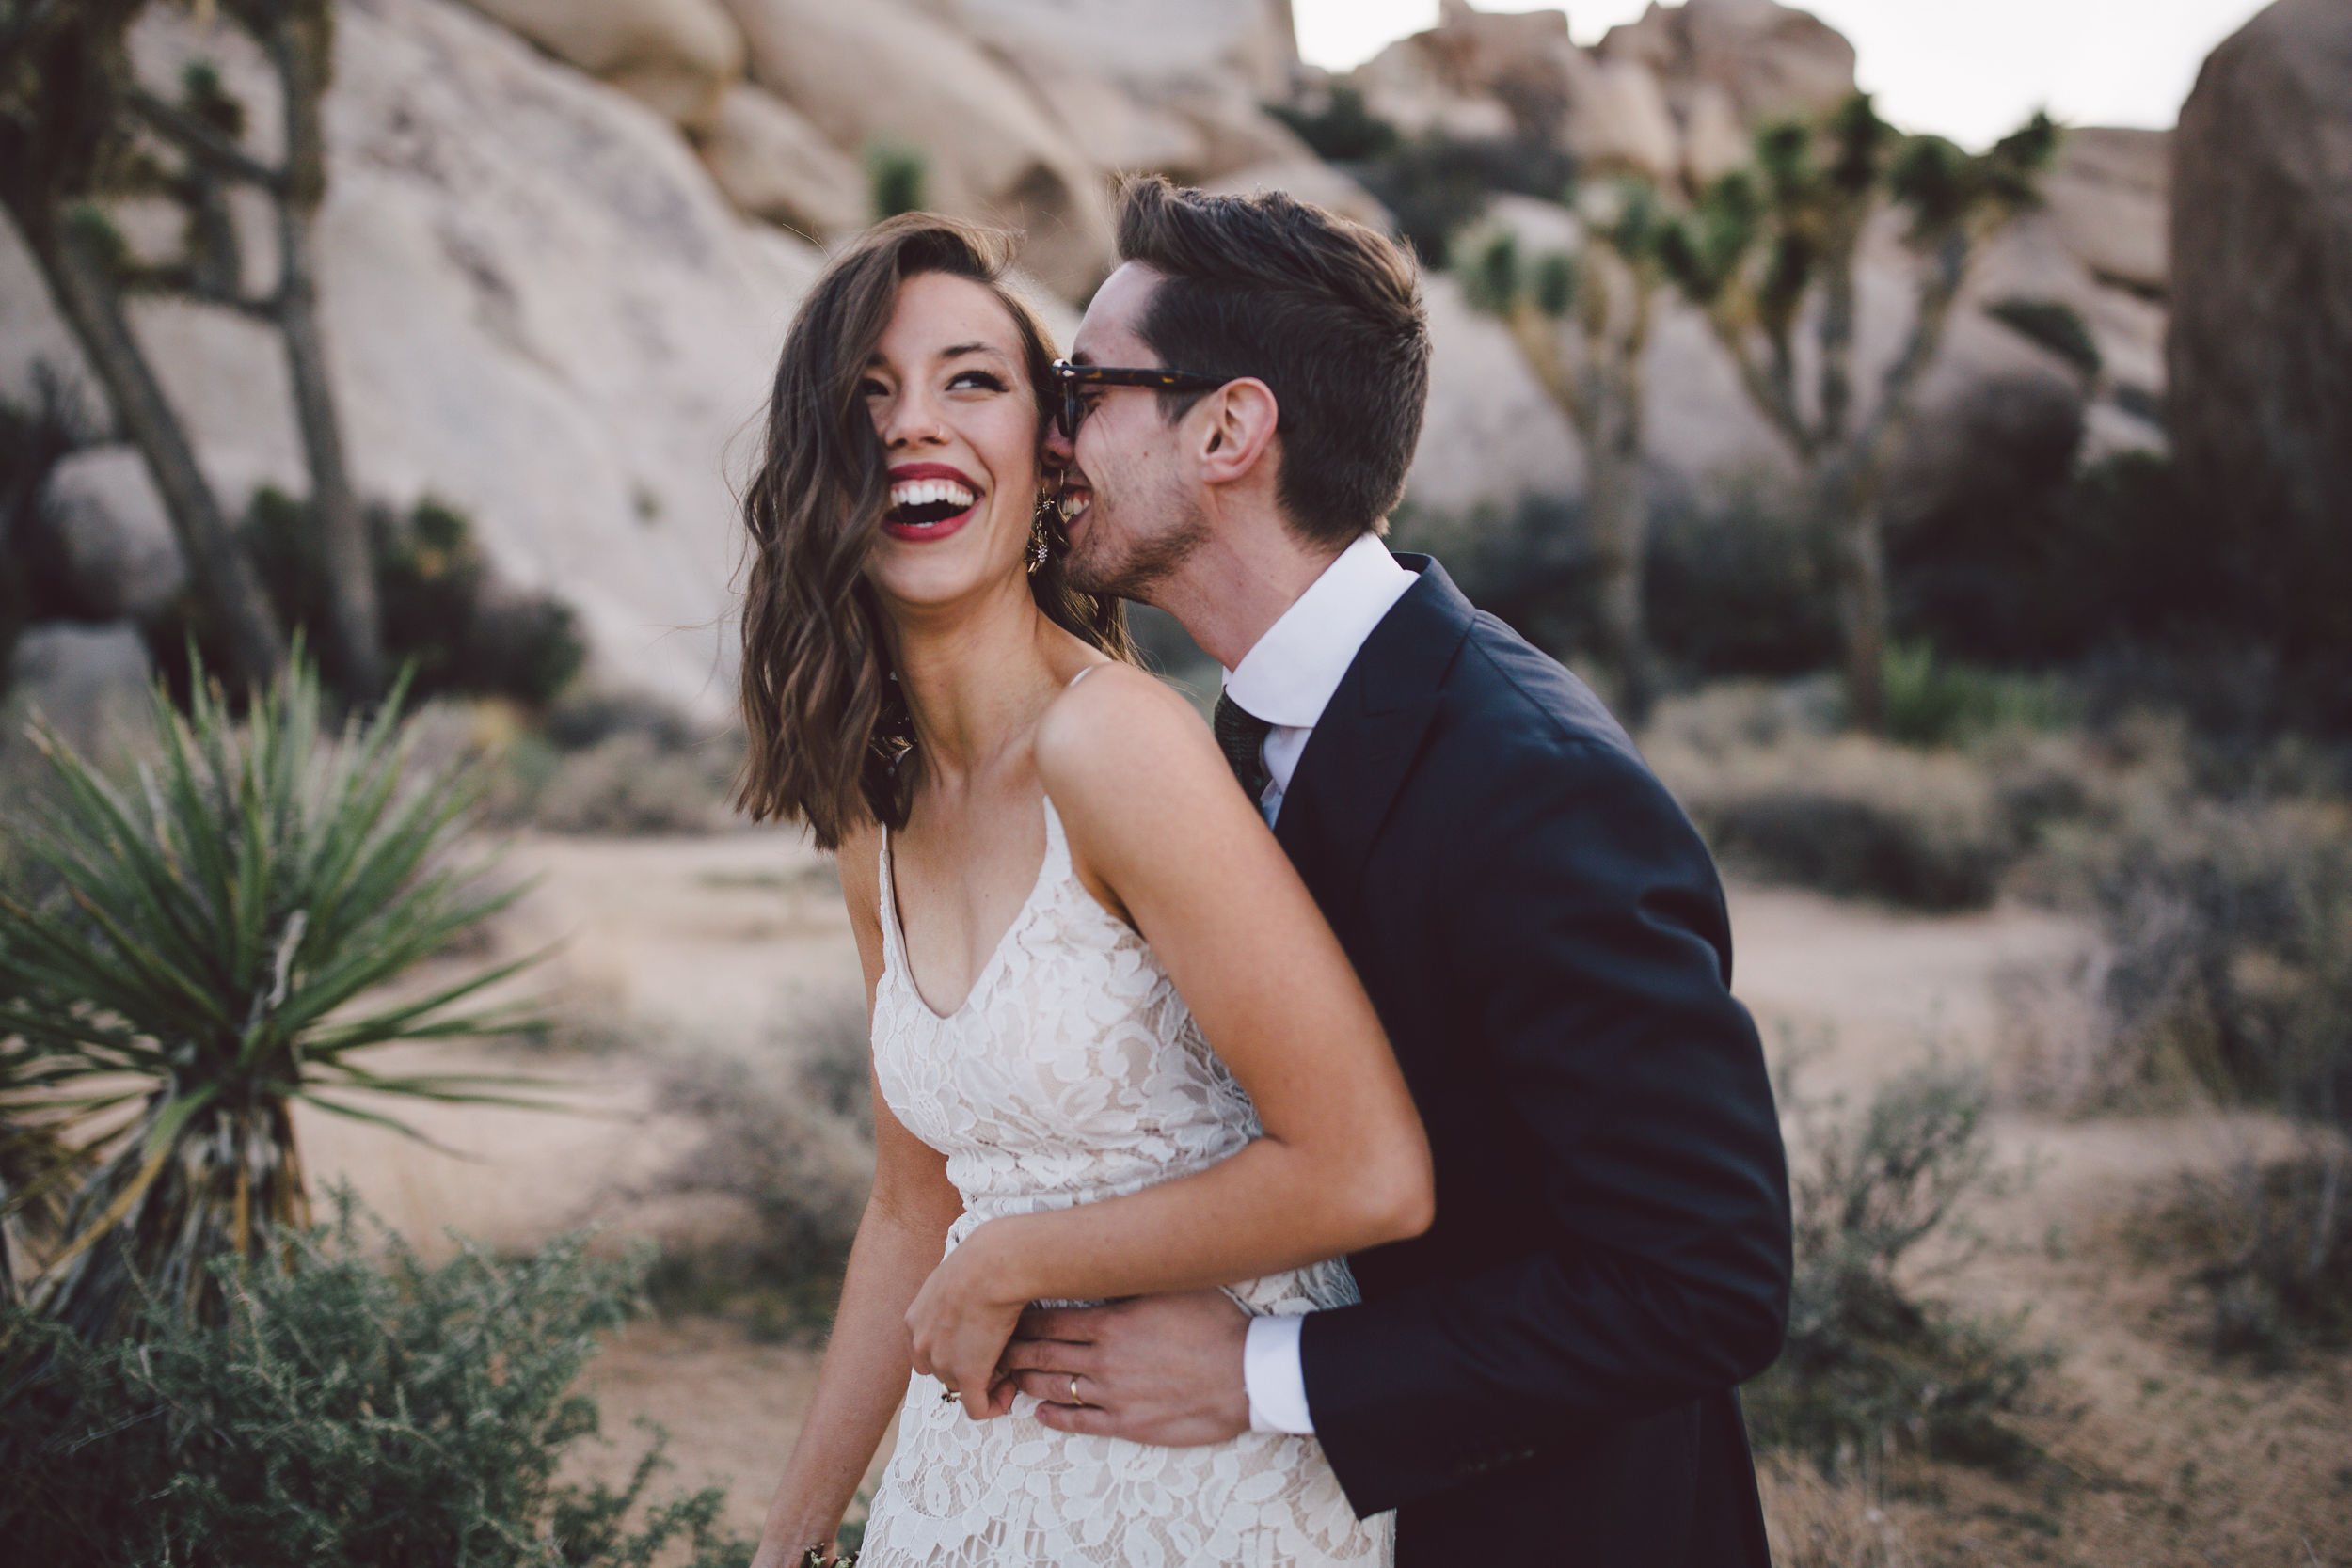 Two people laugh and embrace while in a California desert